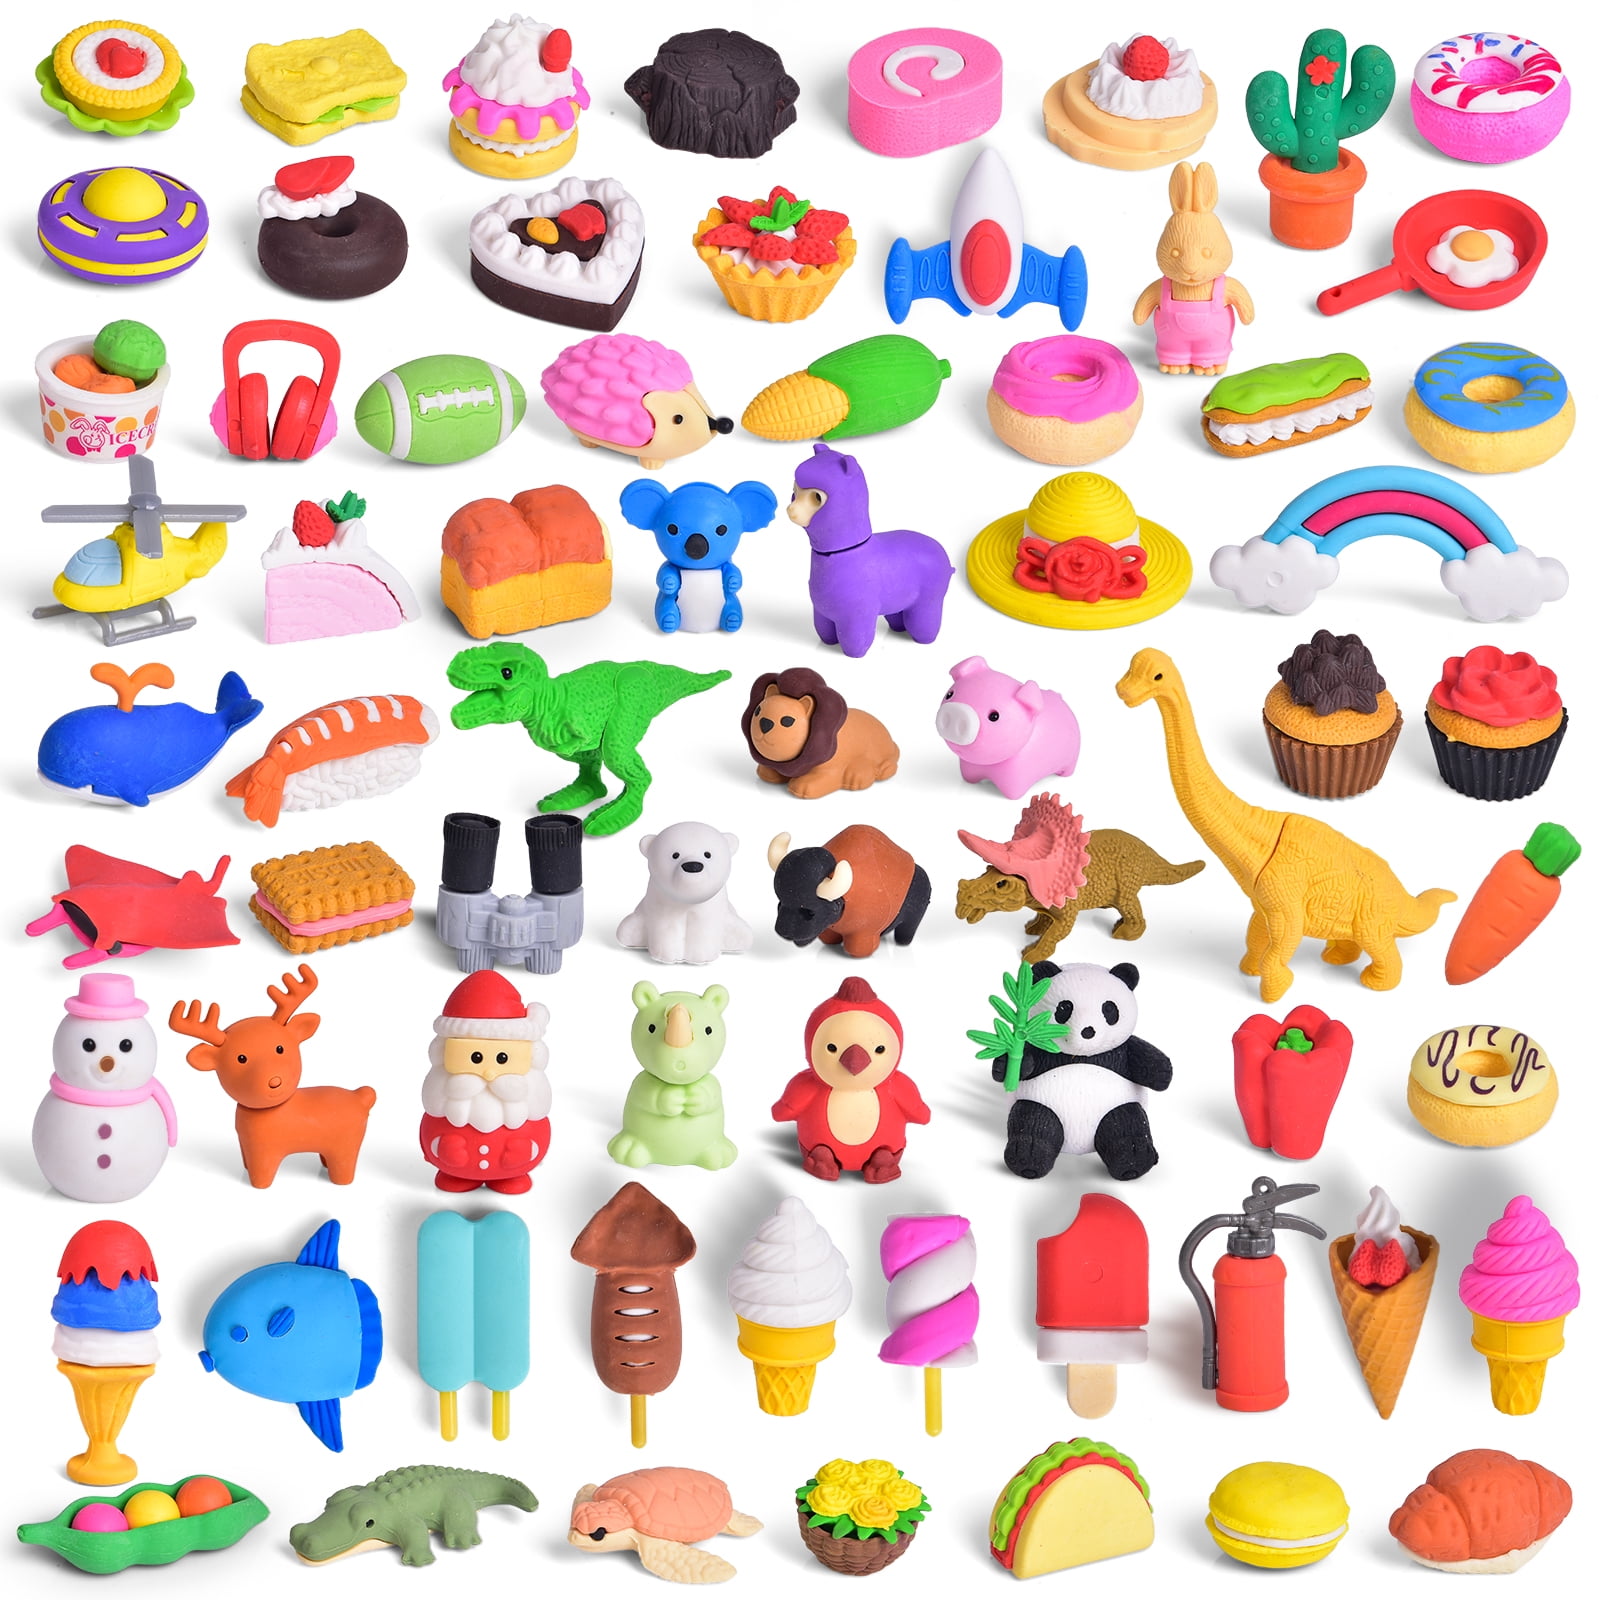 UgyDuky 48 Pack Animal Erasers School Classroom Rewards Games Prizes and Novelty Toys Easter Basket Stuffer for Kids Pencil Erasers 3D Mini Erasers for Kids Birthday Party Supplies Favors 